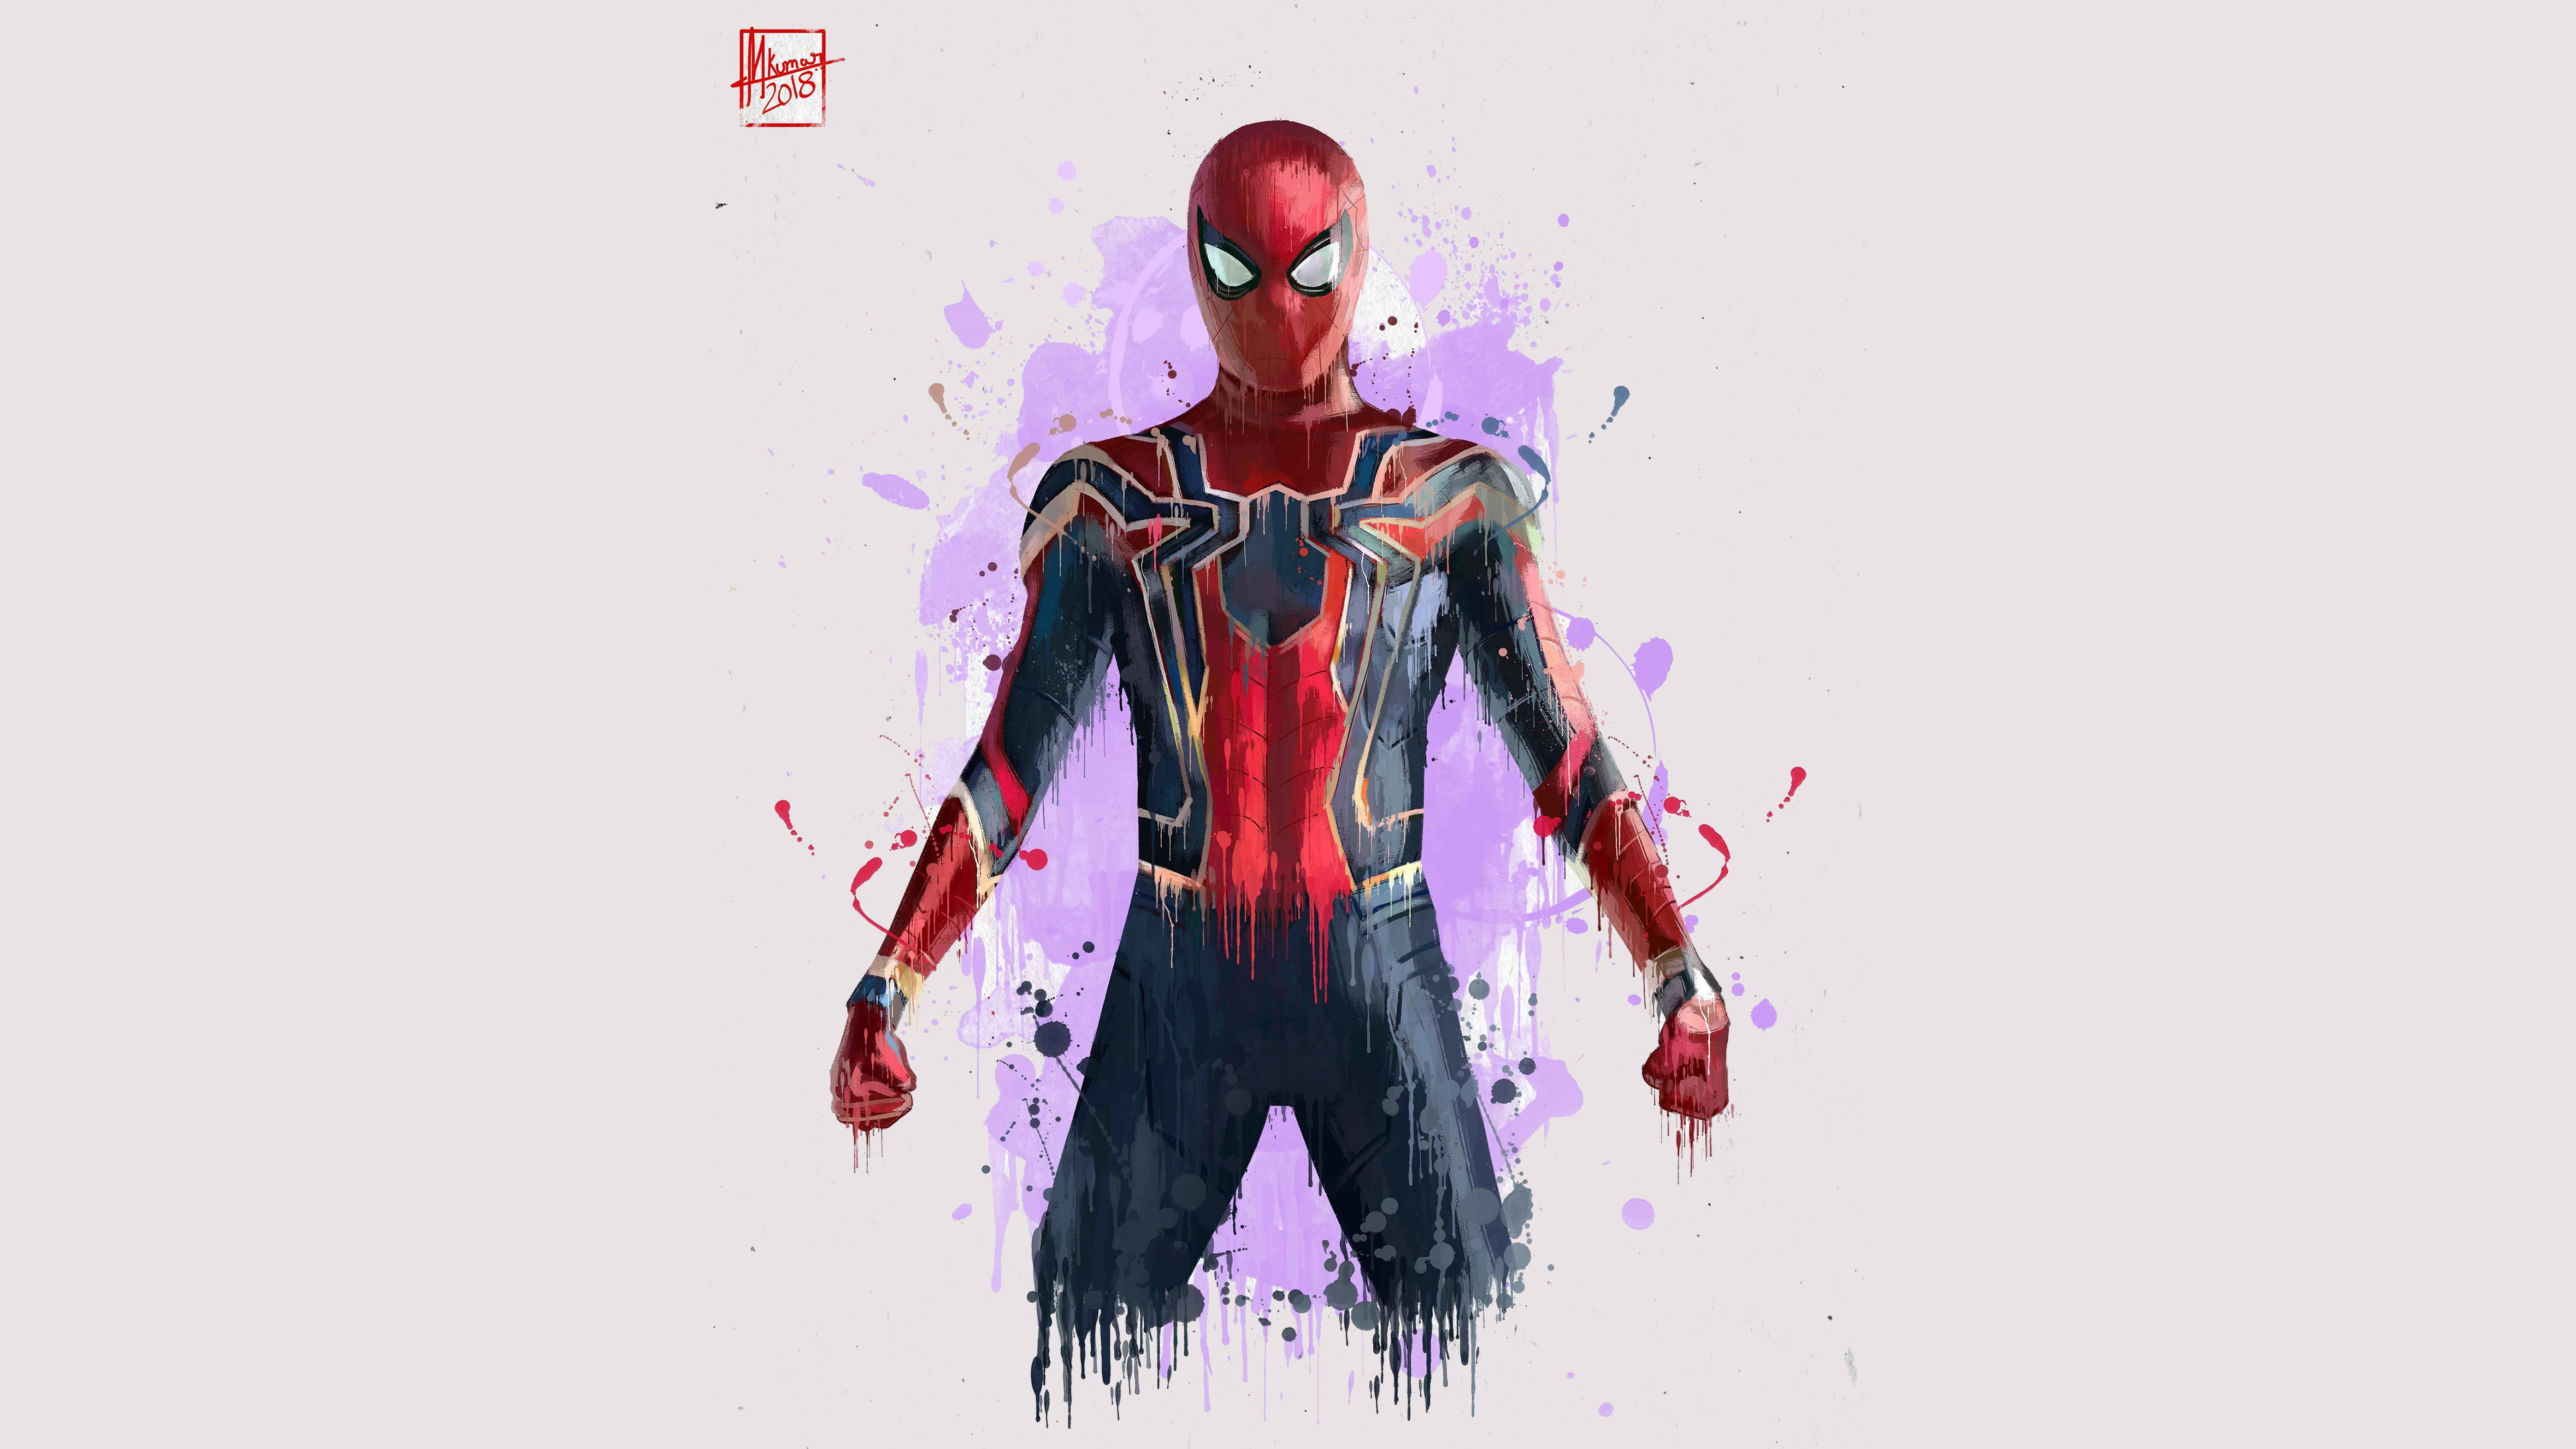 Spiderman In Avengers Infinity War 2018 Artwork, HD Movies, 4k Wallpapers,  Images, Backgrounds, Photos and Pictures